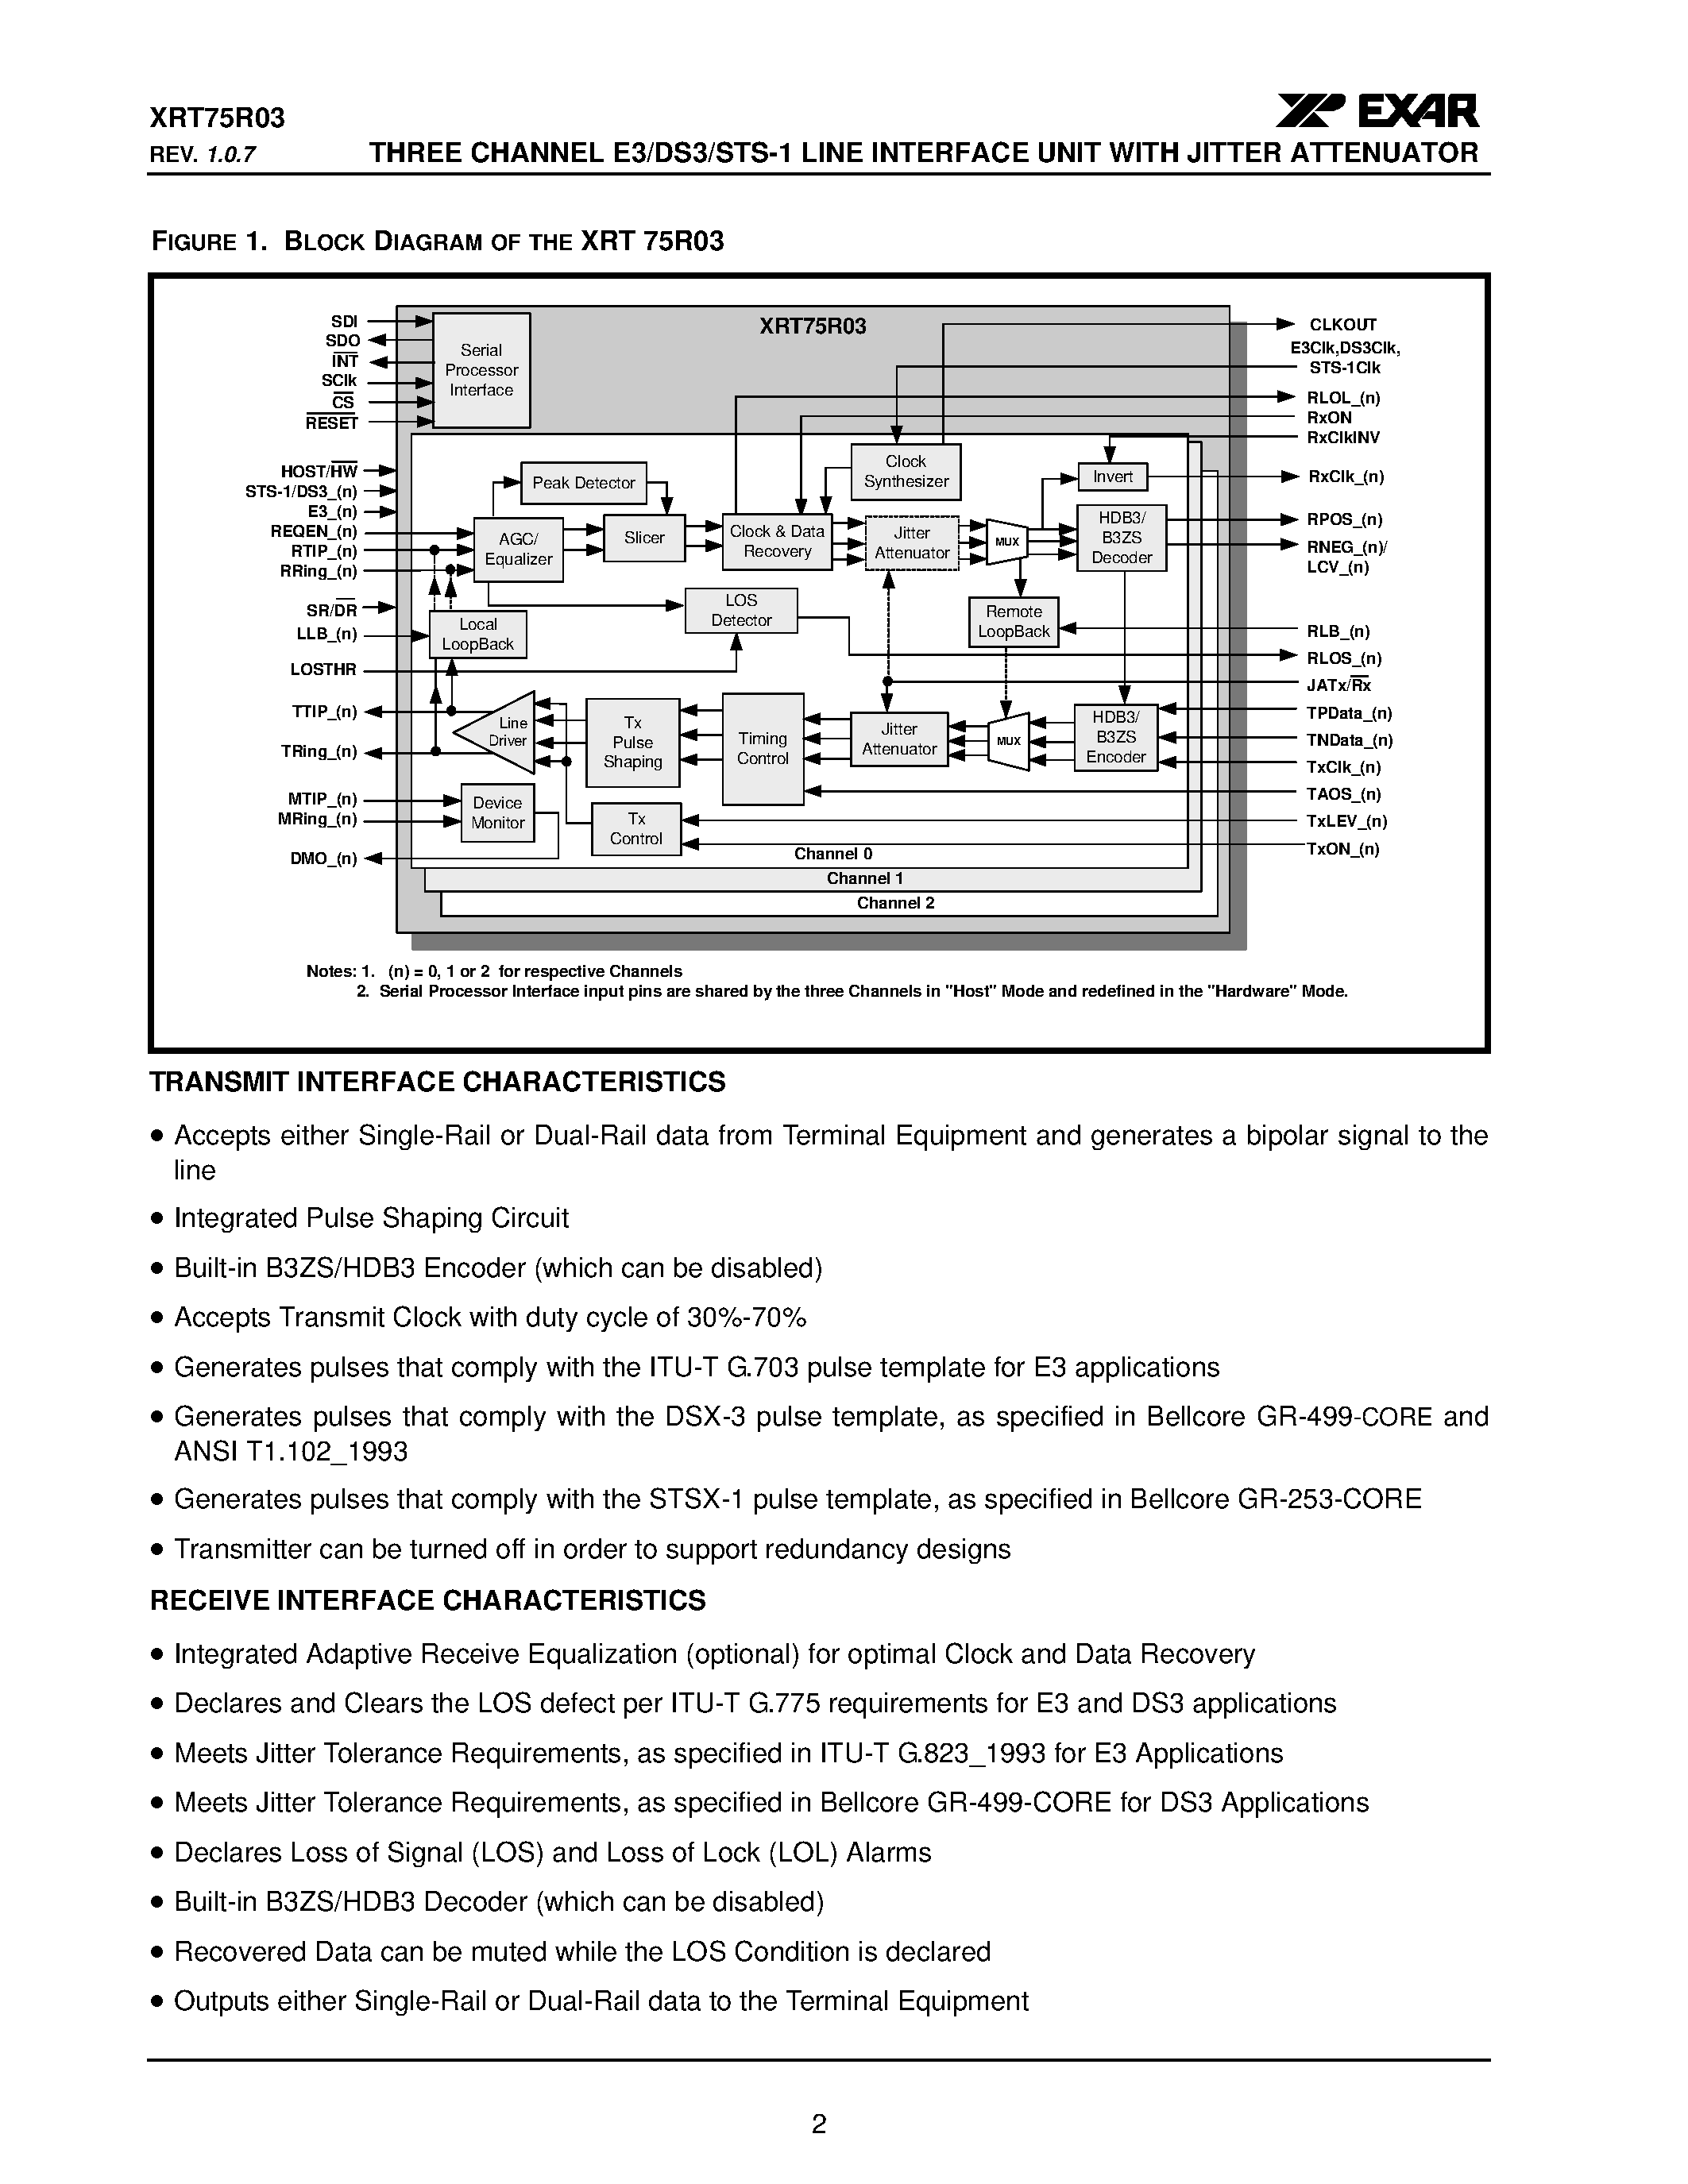 Datasheet XRT75R03 - THREE CHANNEL E3/DS3/STS-1 LINE INTERFACE UNIT page 2